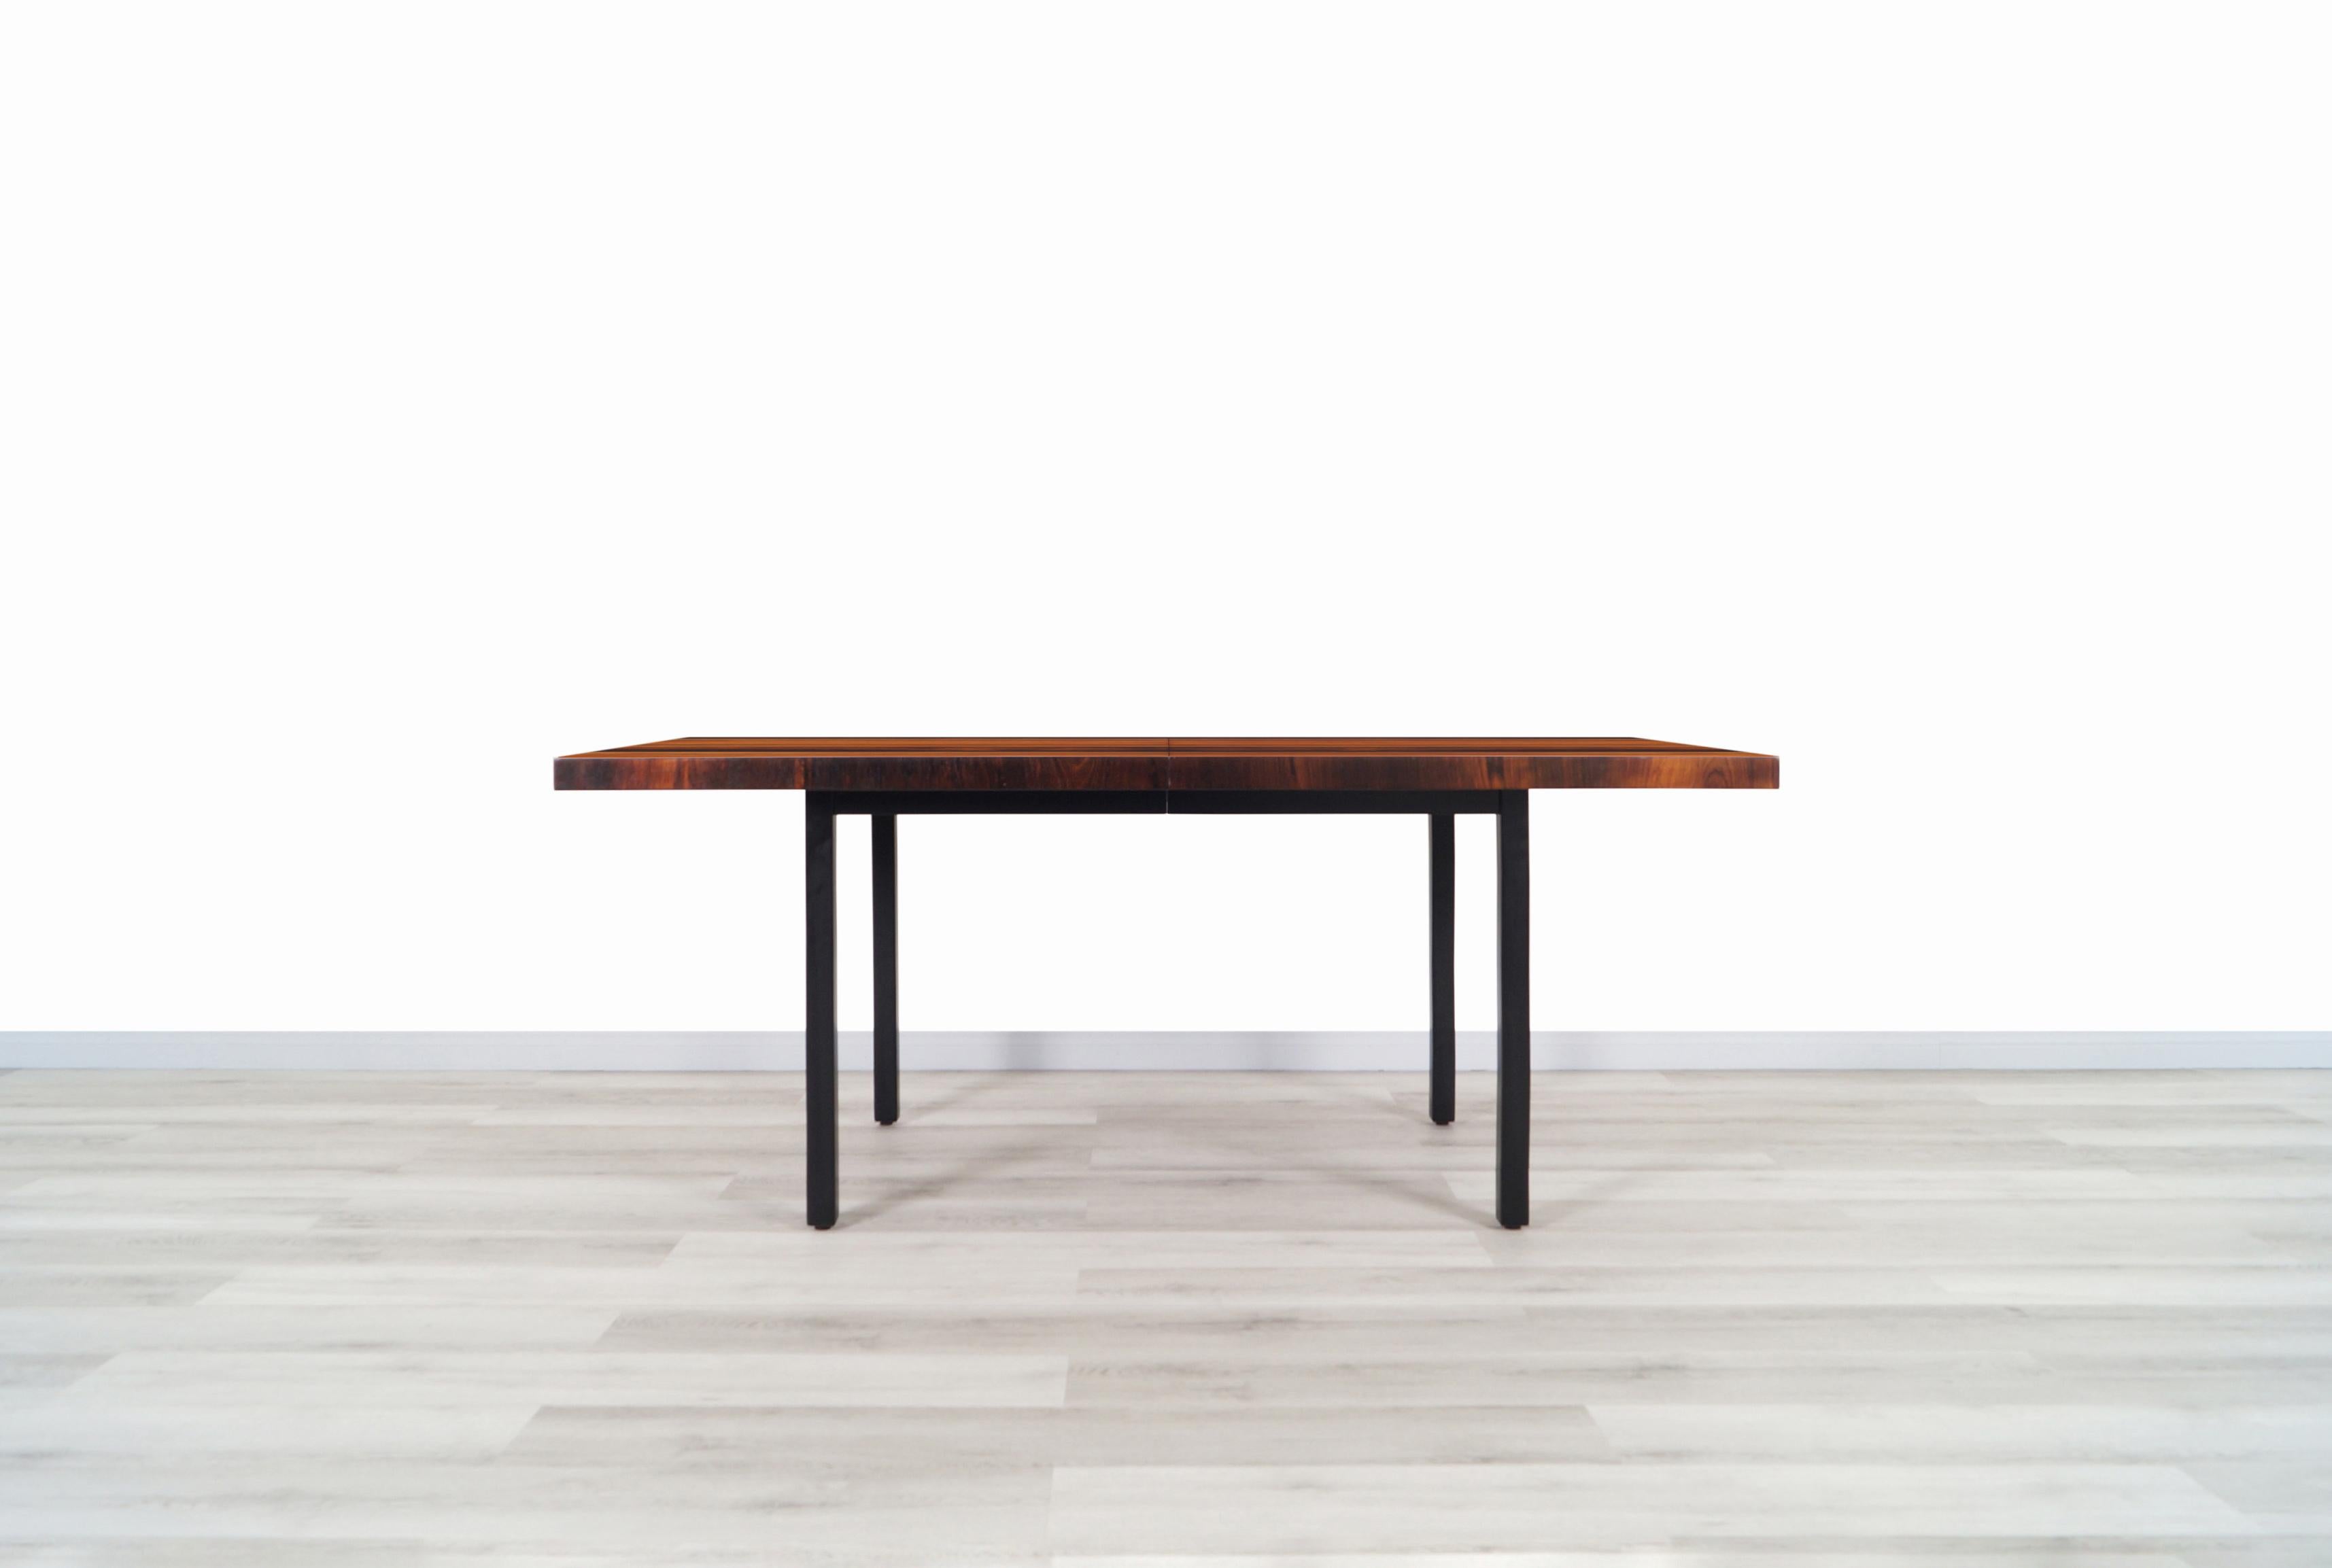 Magnificent vintage expanding dining table designed by Milo Baughman for Directional in the United States, circa 1960s. This spectacular and organic design features a mix of quality woods such as rosewood, walnut, and oak, creating a seamless